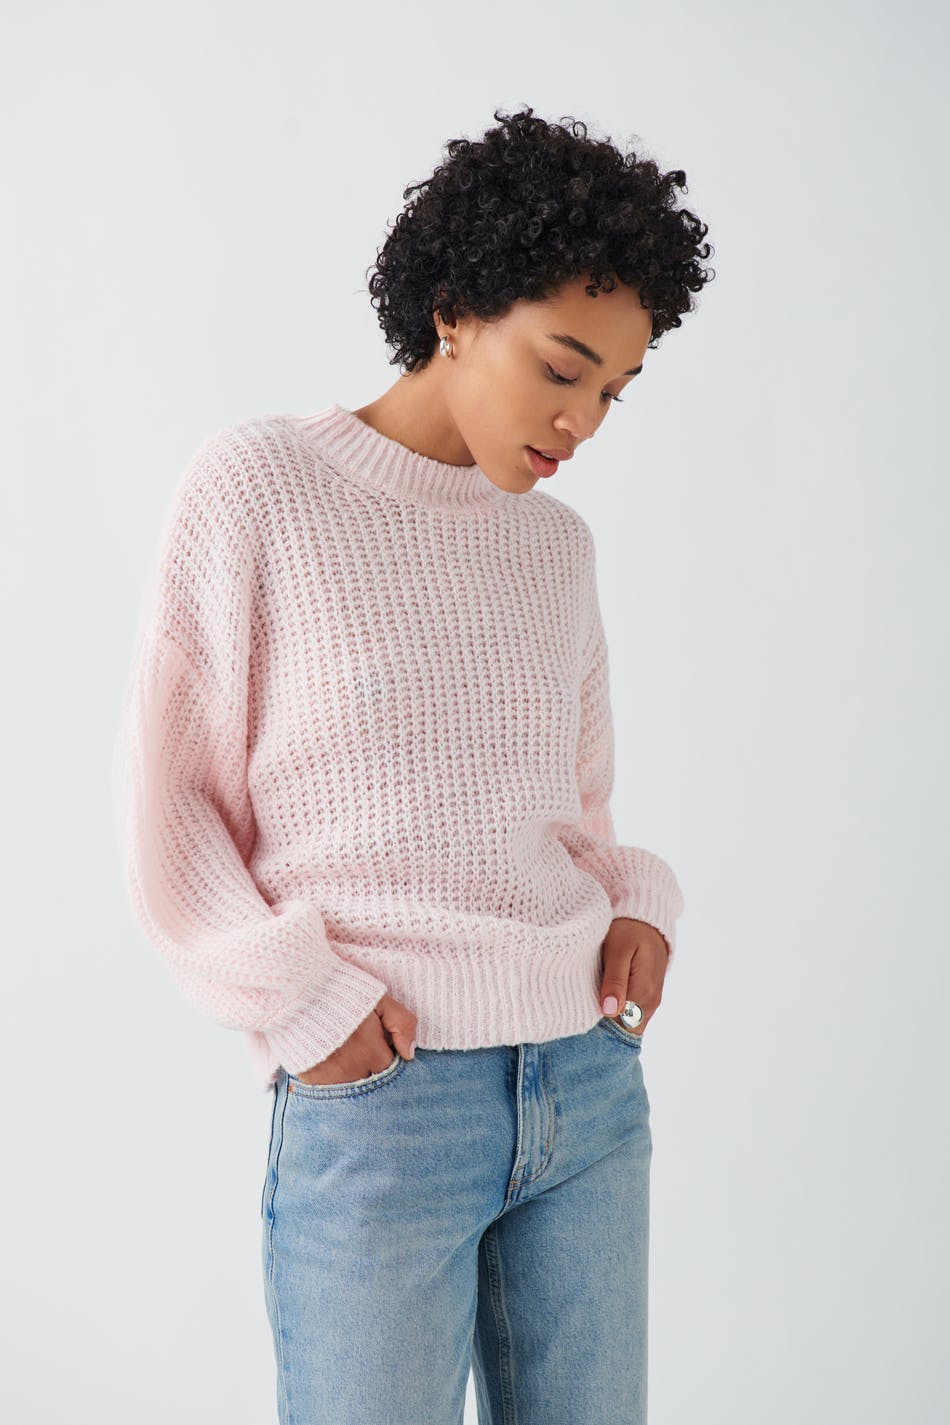 Gina Tricot - Chunky knitted sweater - stickade tröjor - Pink - XS - Female